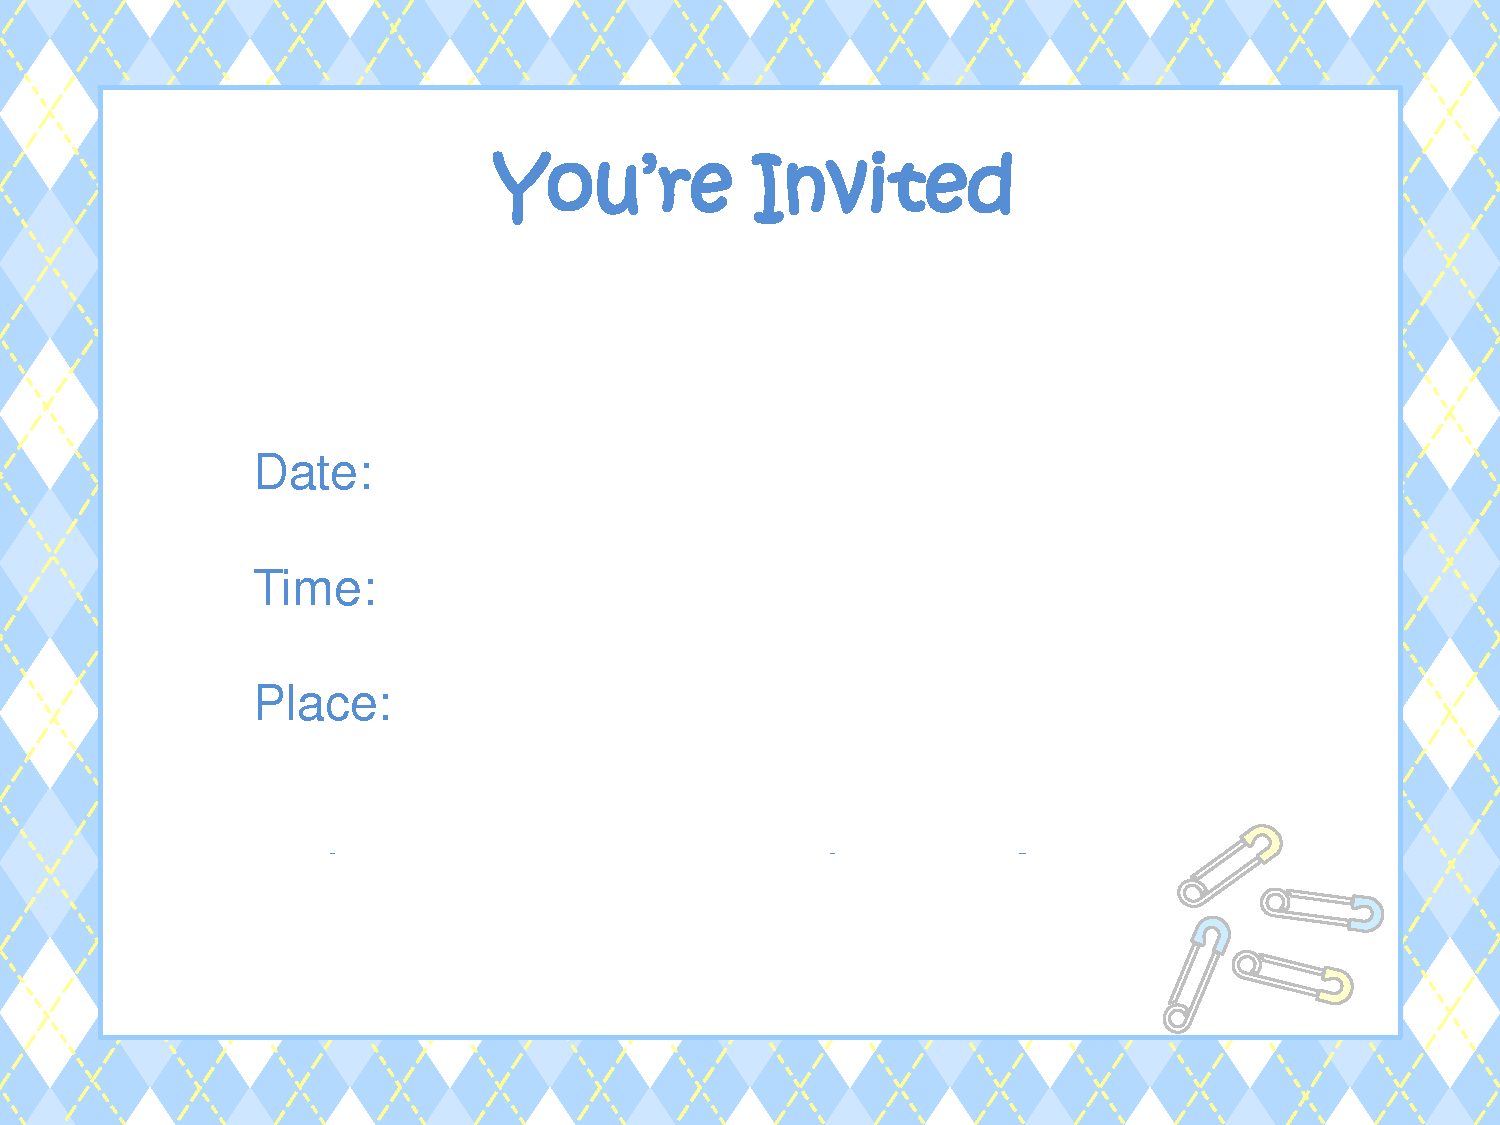 clipart baby shower invitations - photo #8